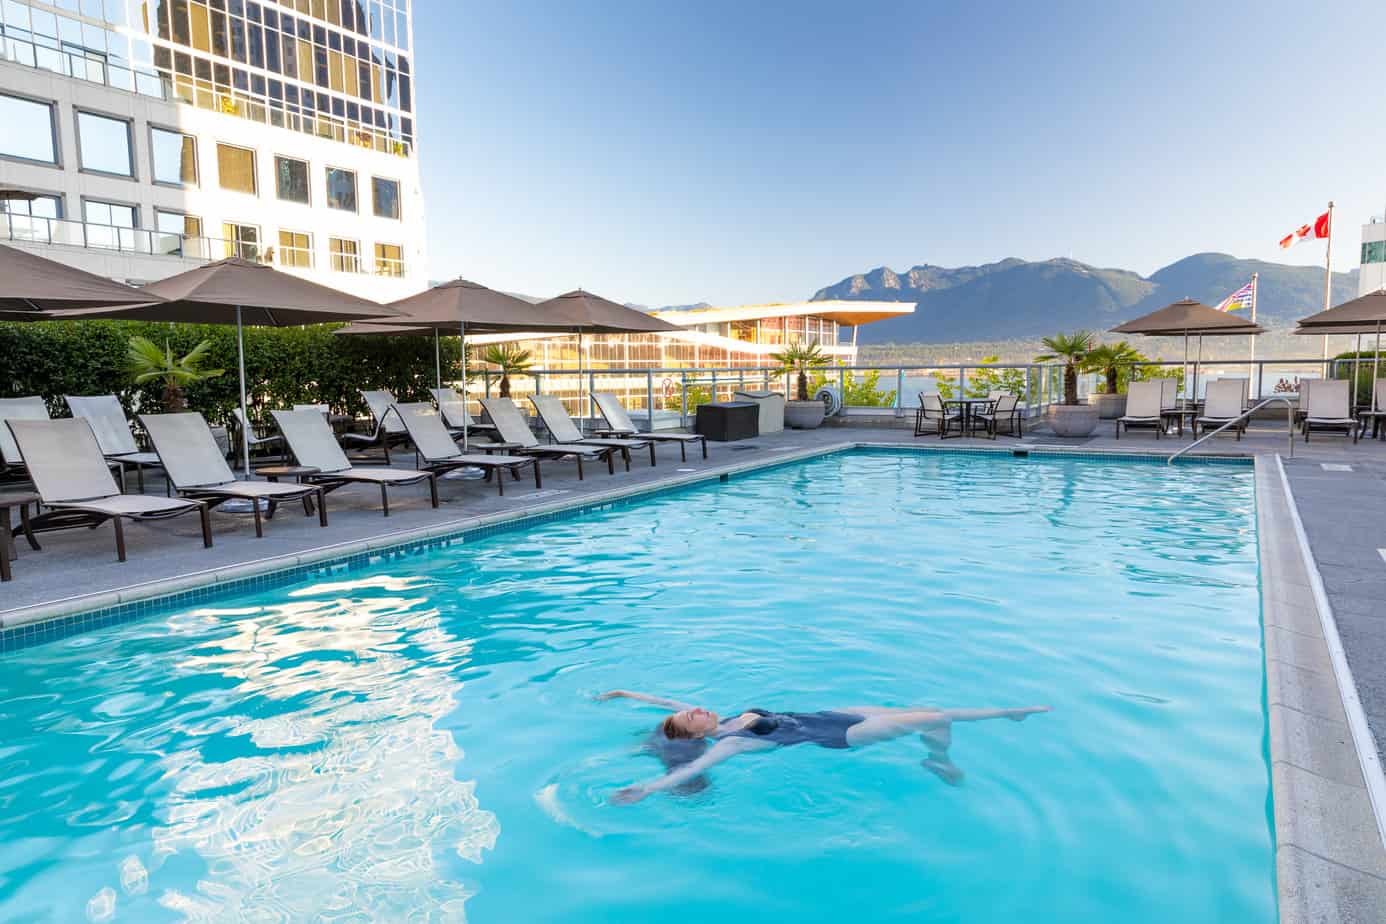 A women floating on her back with her arms up relaxing in the outdoor roof top pool. There is a view of the mountains and Northshore and part of the Vancouver convention Centre building. There are many lounge chairs surrounding the pool.